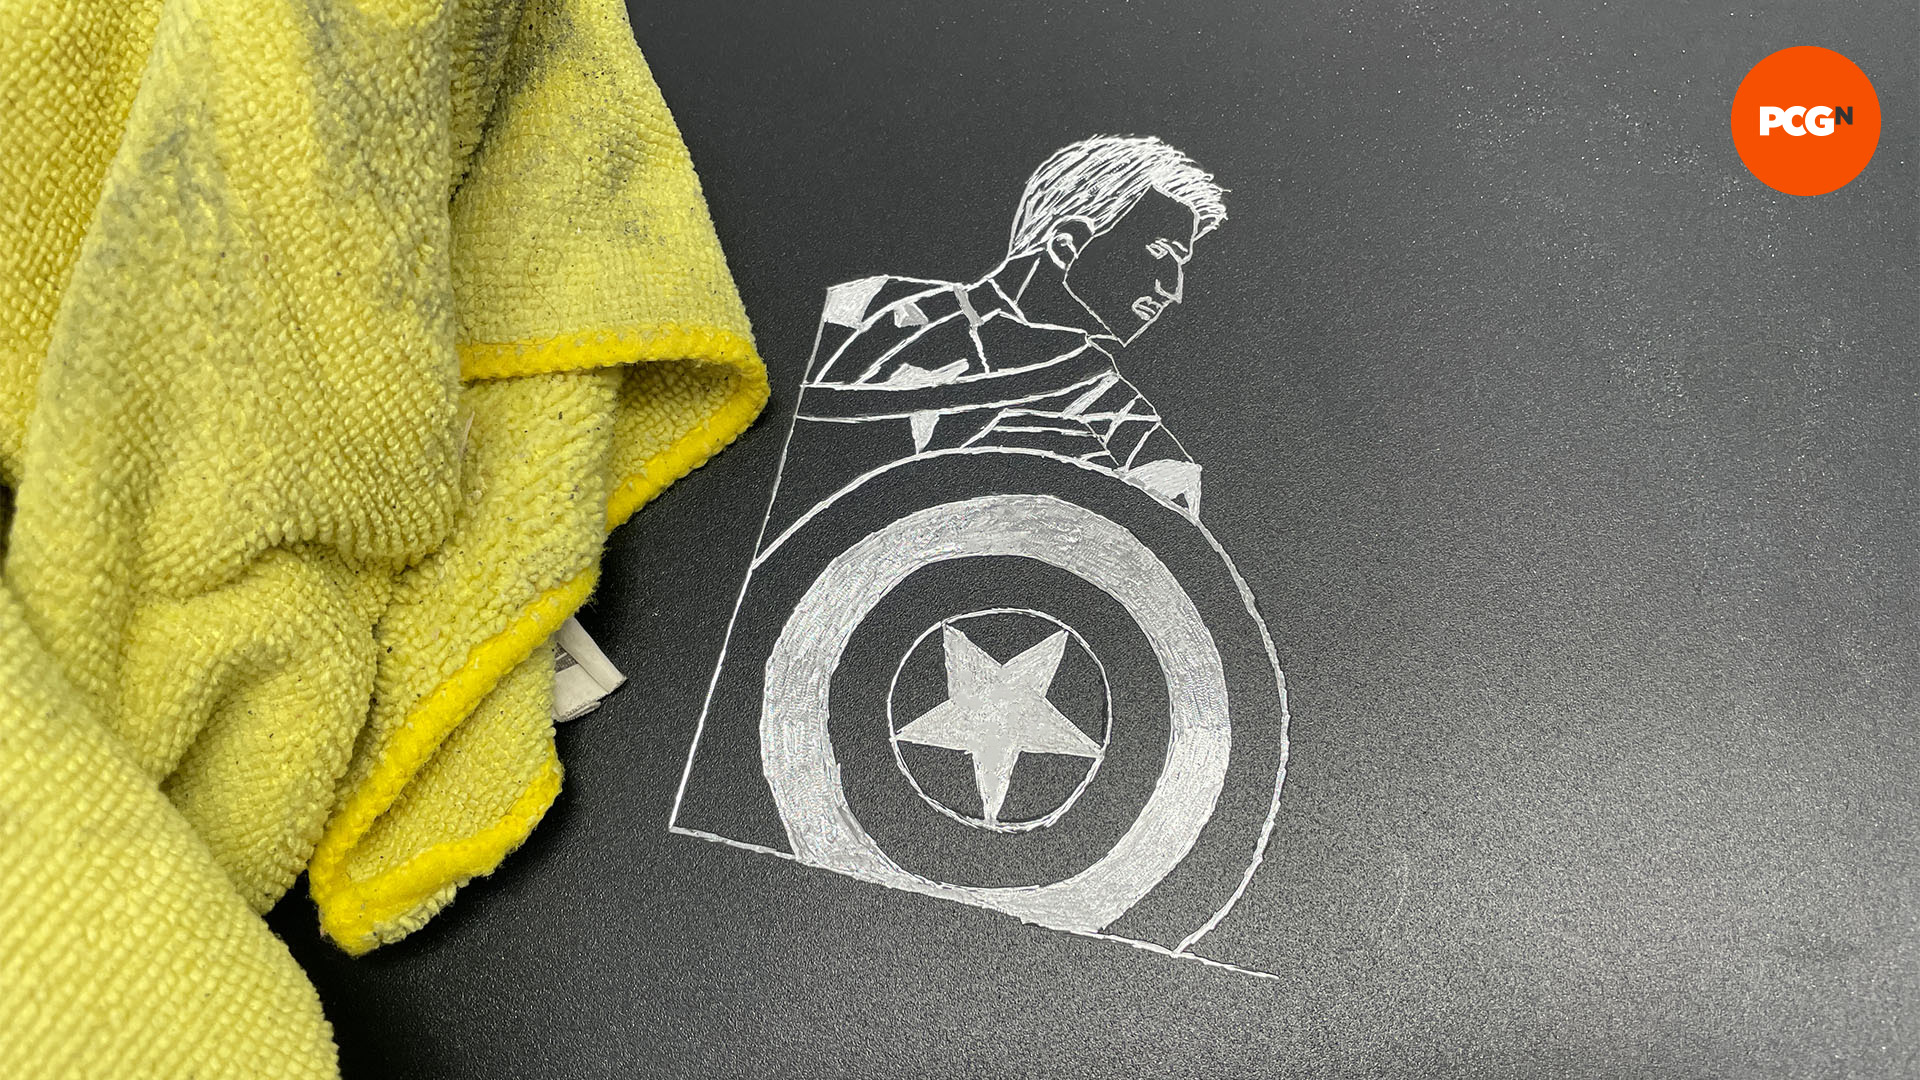 How to engrave your PC case: Clean finished panel with Captain America engraving